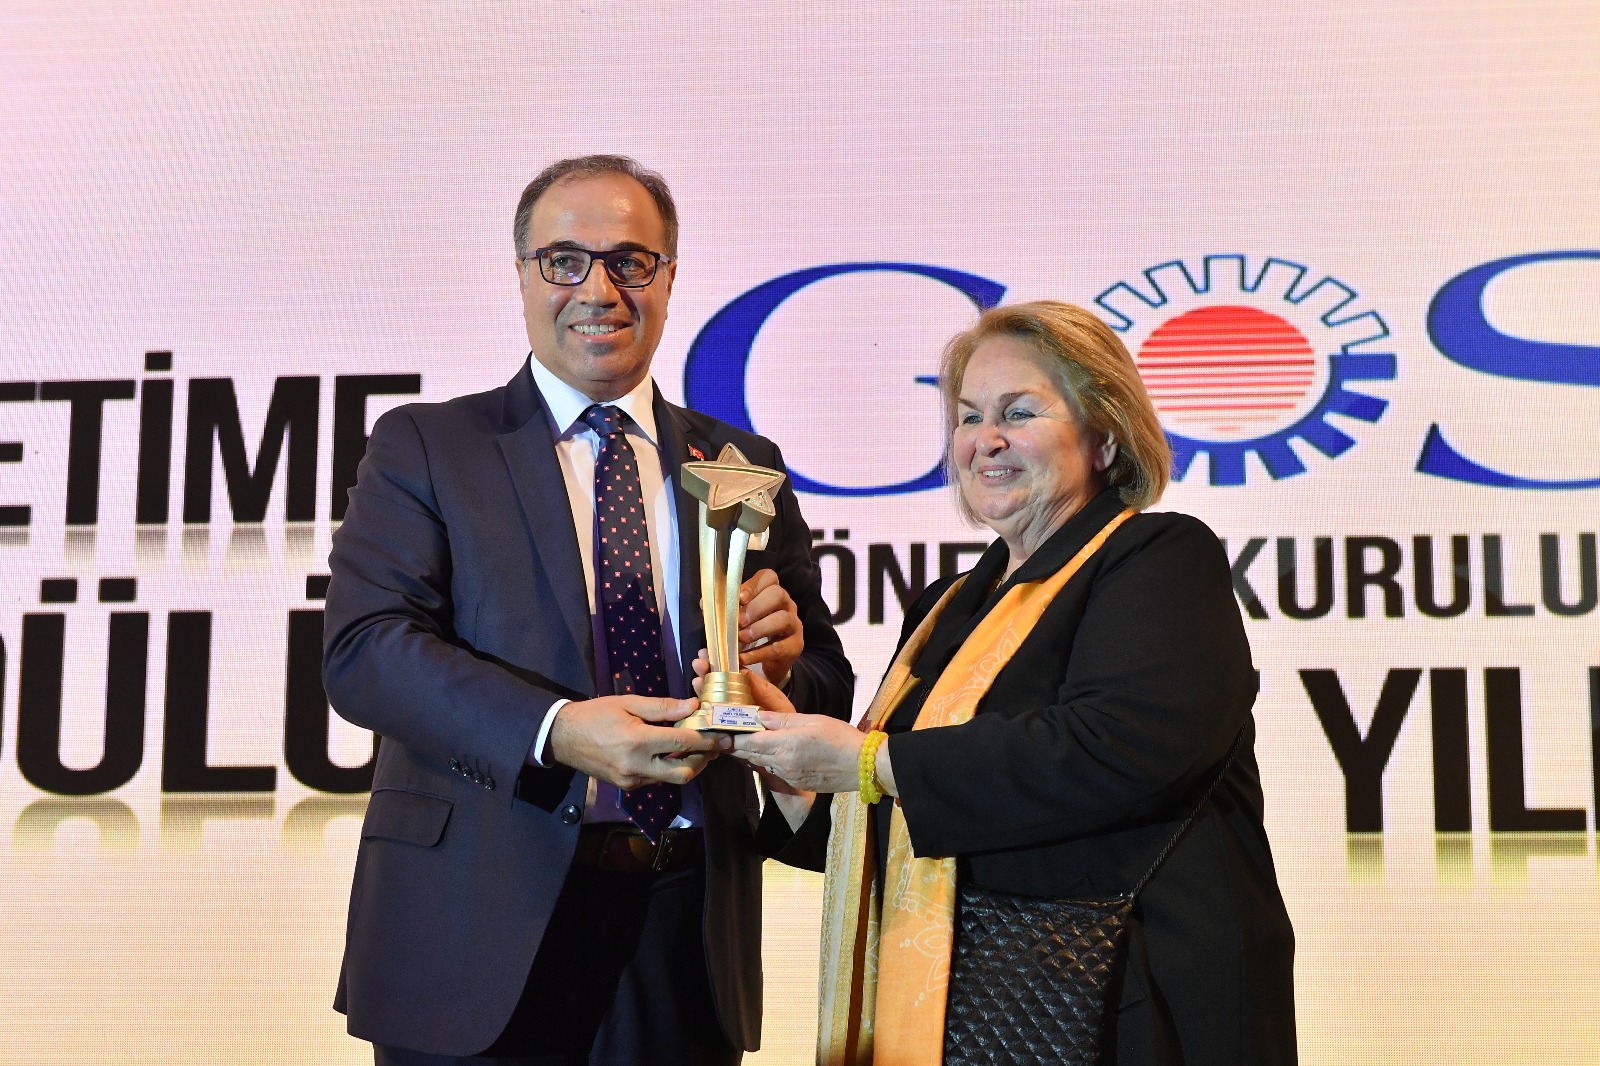 industry-and-production-contribution-award-to-mrvahit-yildirim.jpg